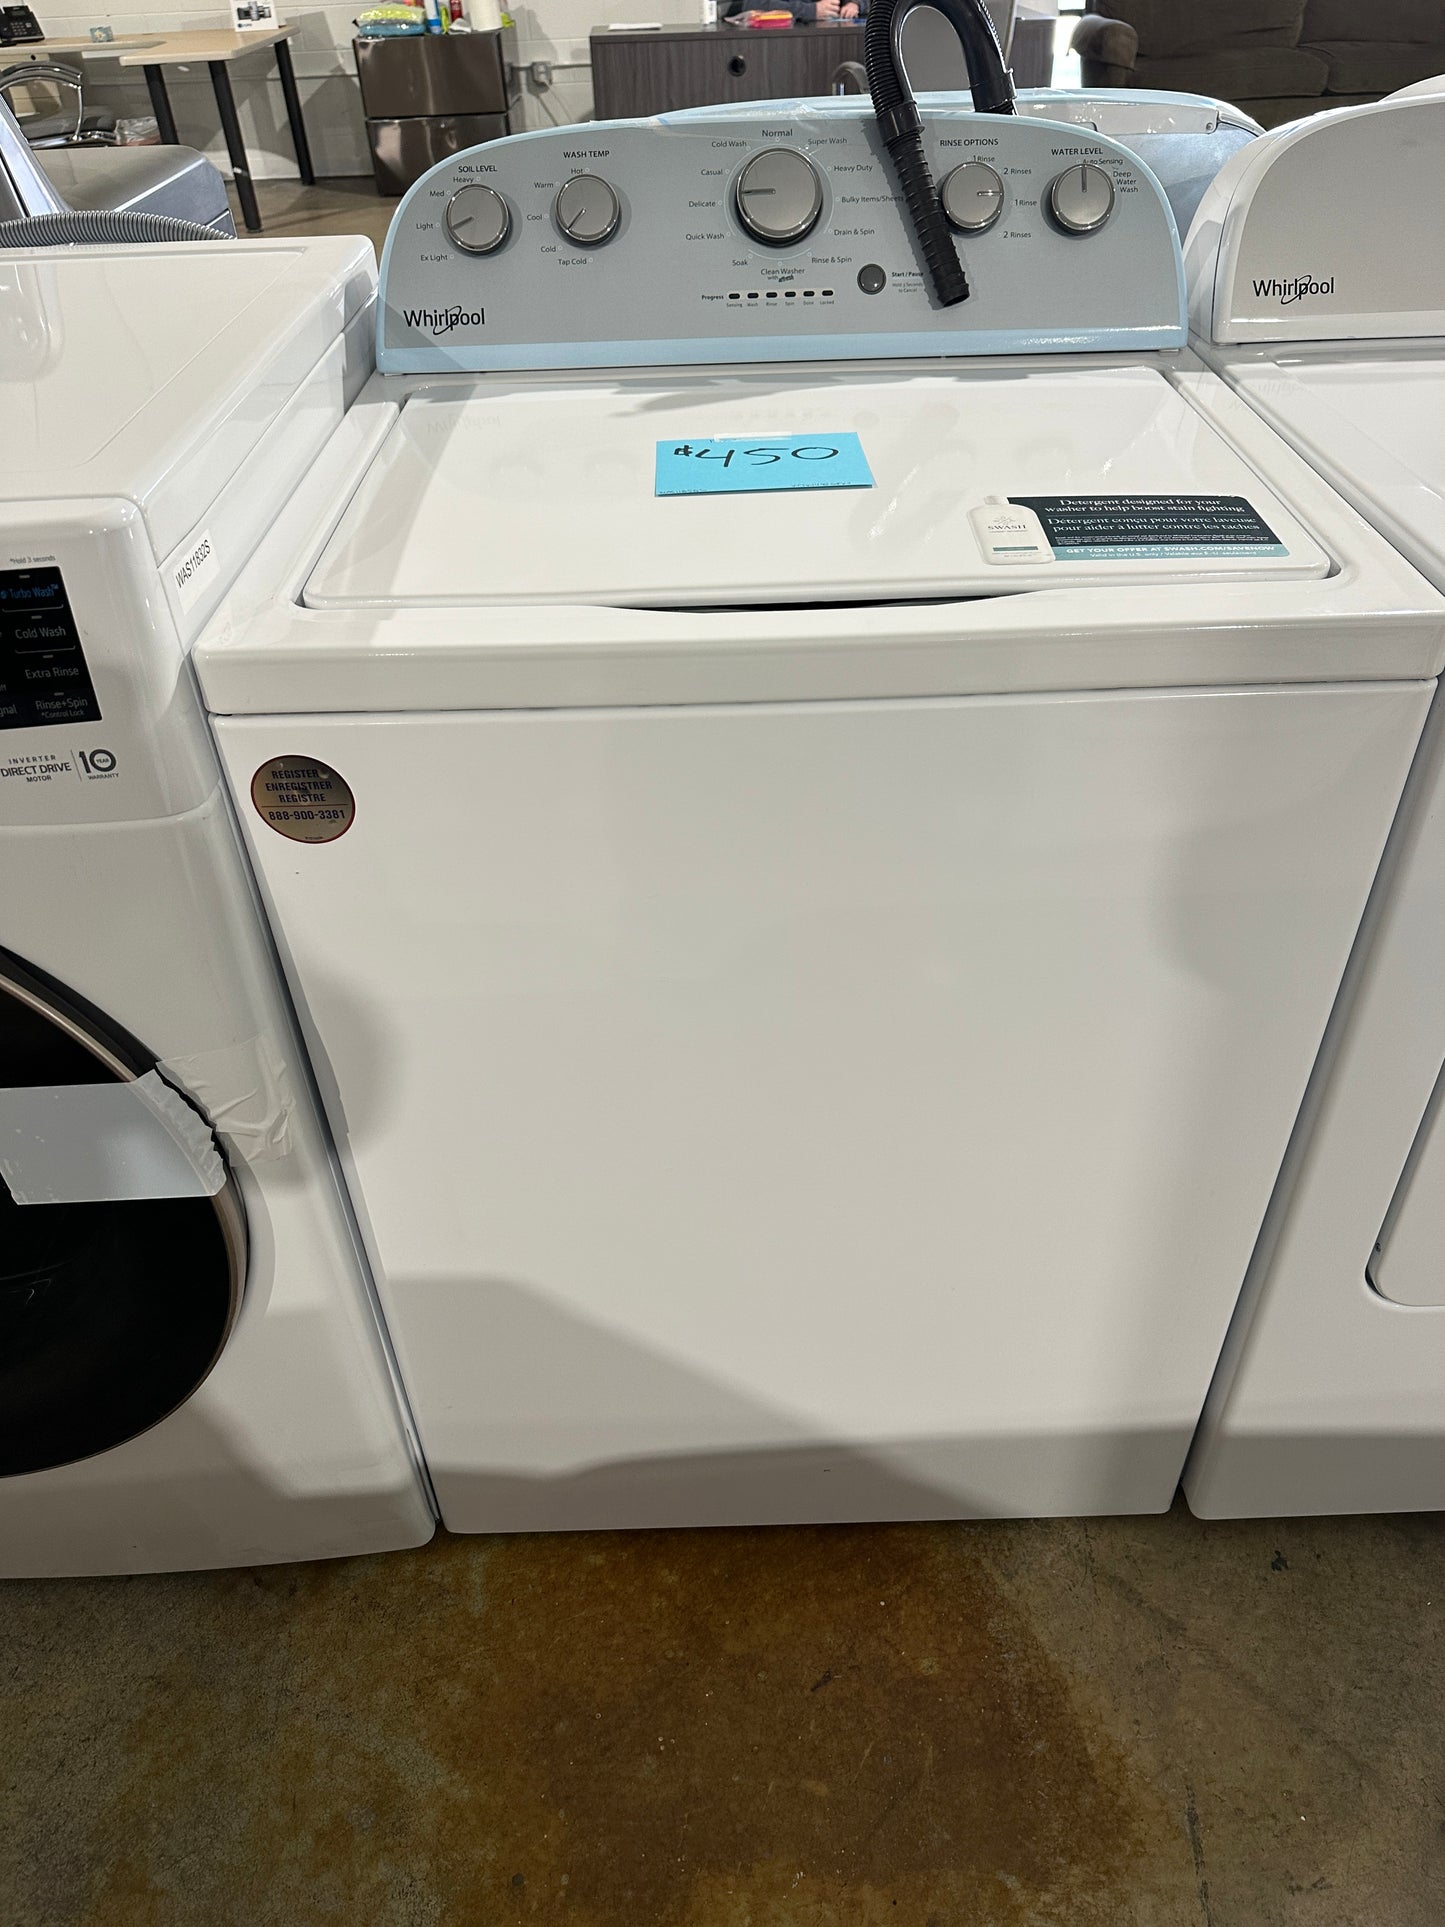 GREAT NEW WHIRLPOOL TOP LOAD WASHER - WAS11850S WTW4816FW